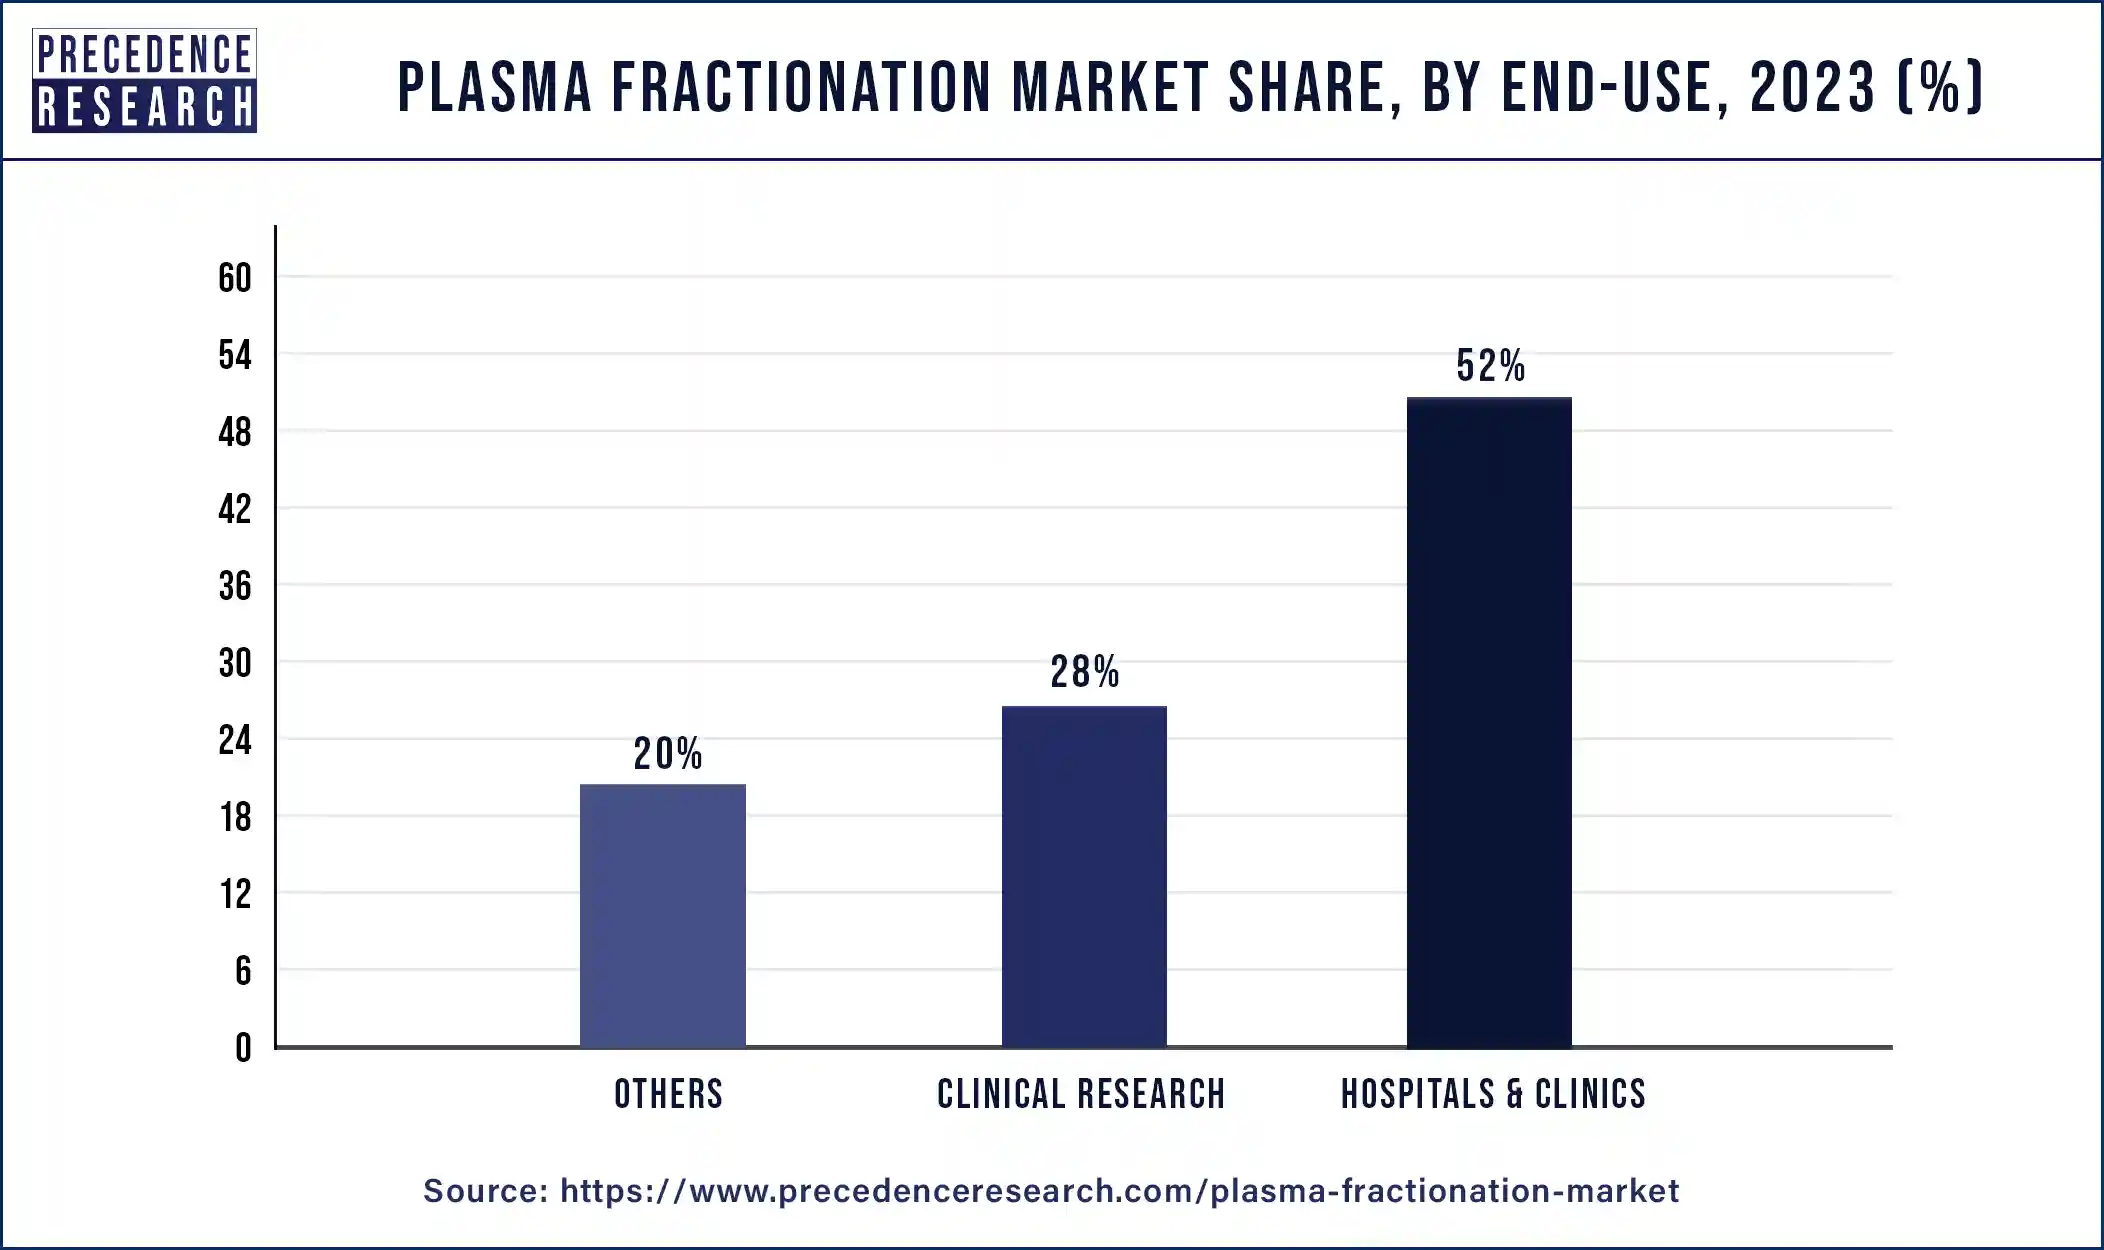 Plasma Fractionation Market Share, By End-use, 2023 (%)